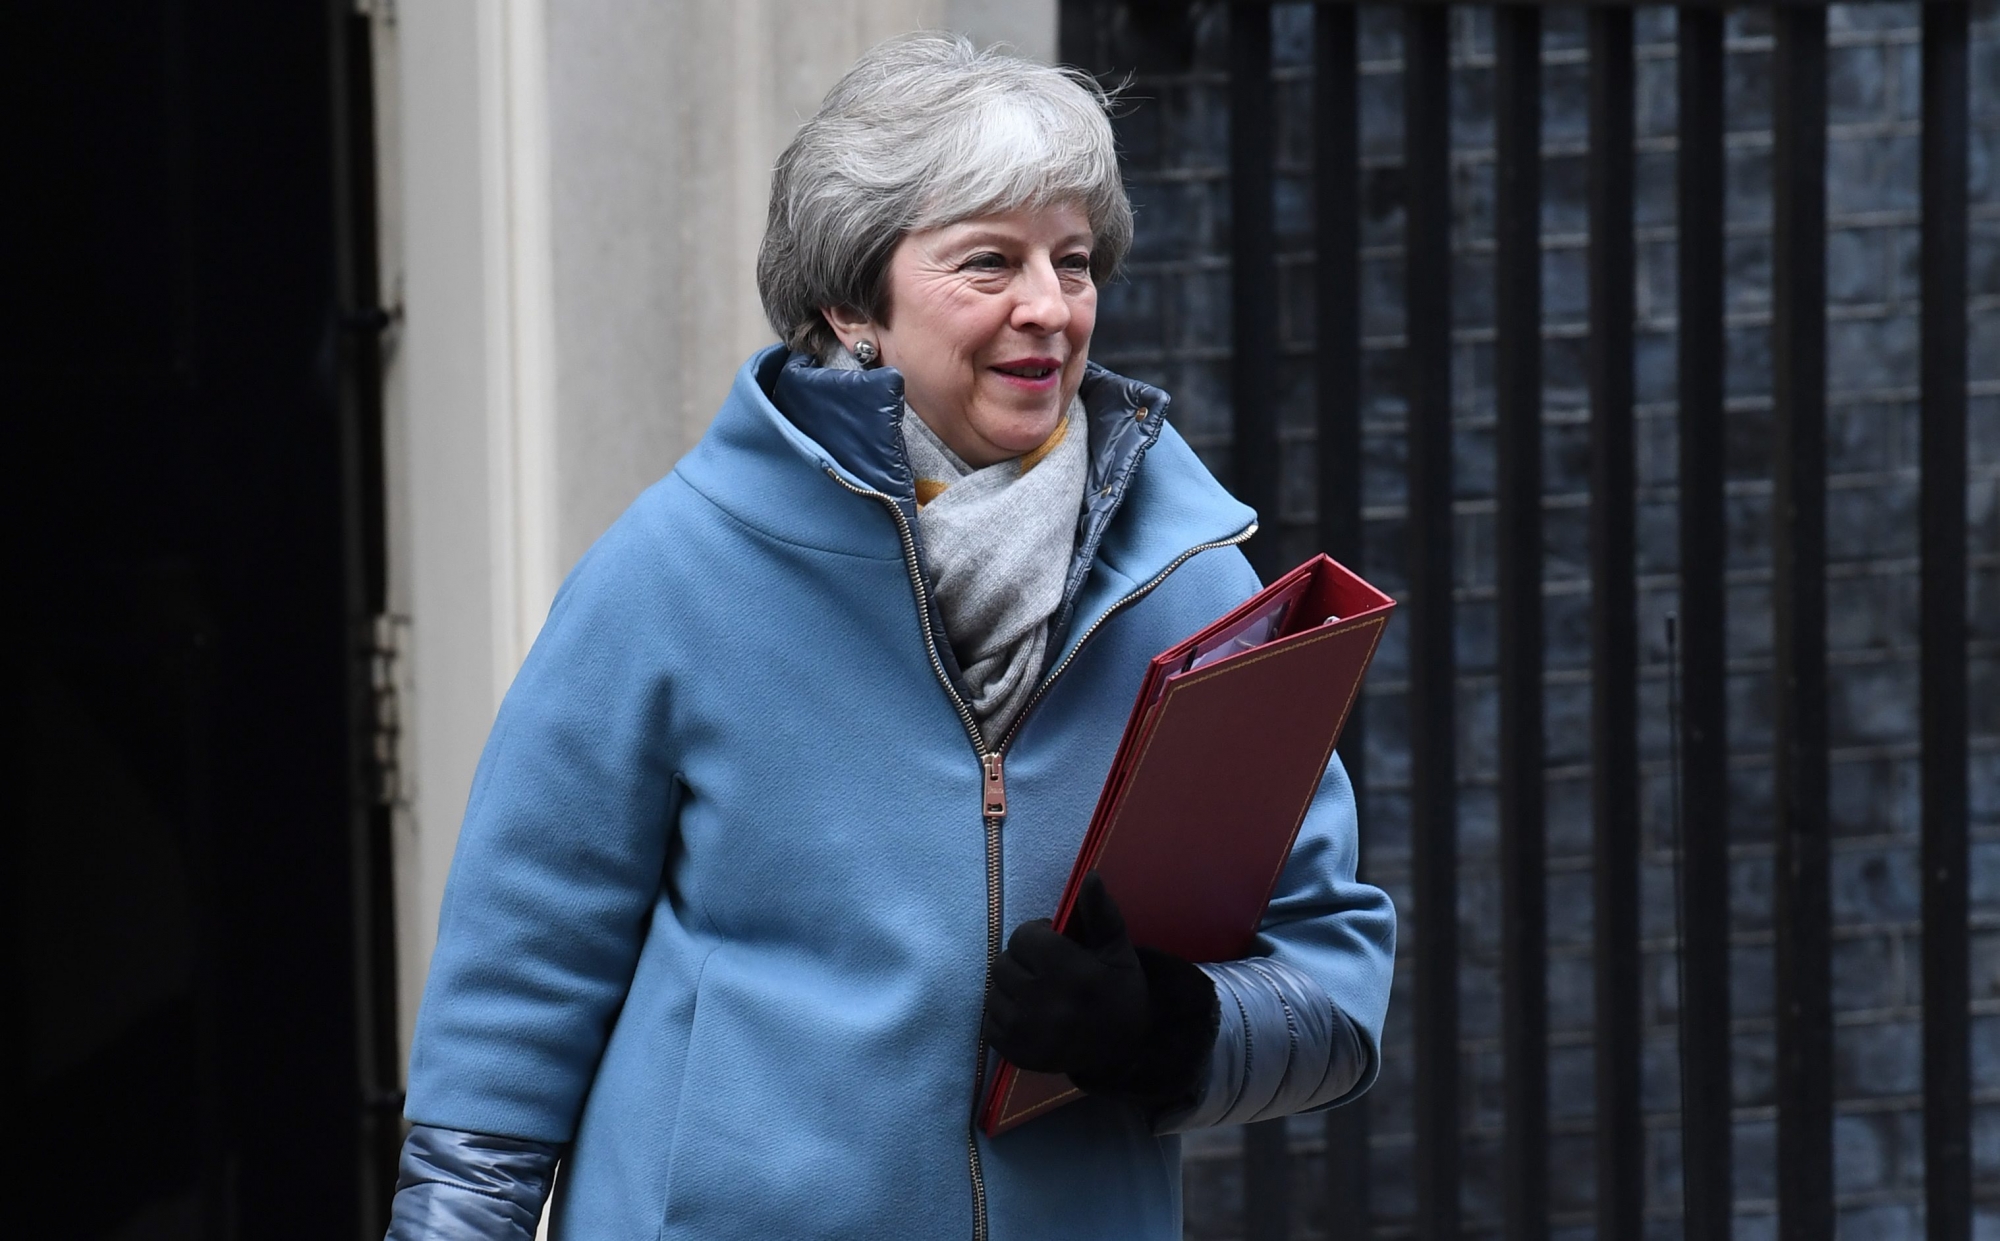 epa07306482 Britain's Prime Minister Theresa May leaves  10 Downing street in to give a statement in the Houses of Parliament in Westminster London, Britain, 21 January 2019. Theresa May is set to present her Plan B for Brexit to the British Parliament on 21 January.  EPA/NEIL HALL BRITAIN BREXIT VOTE